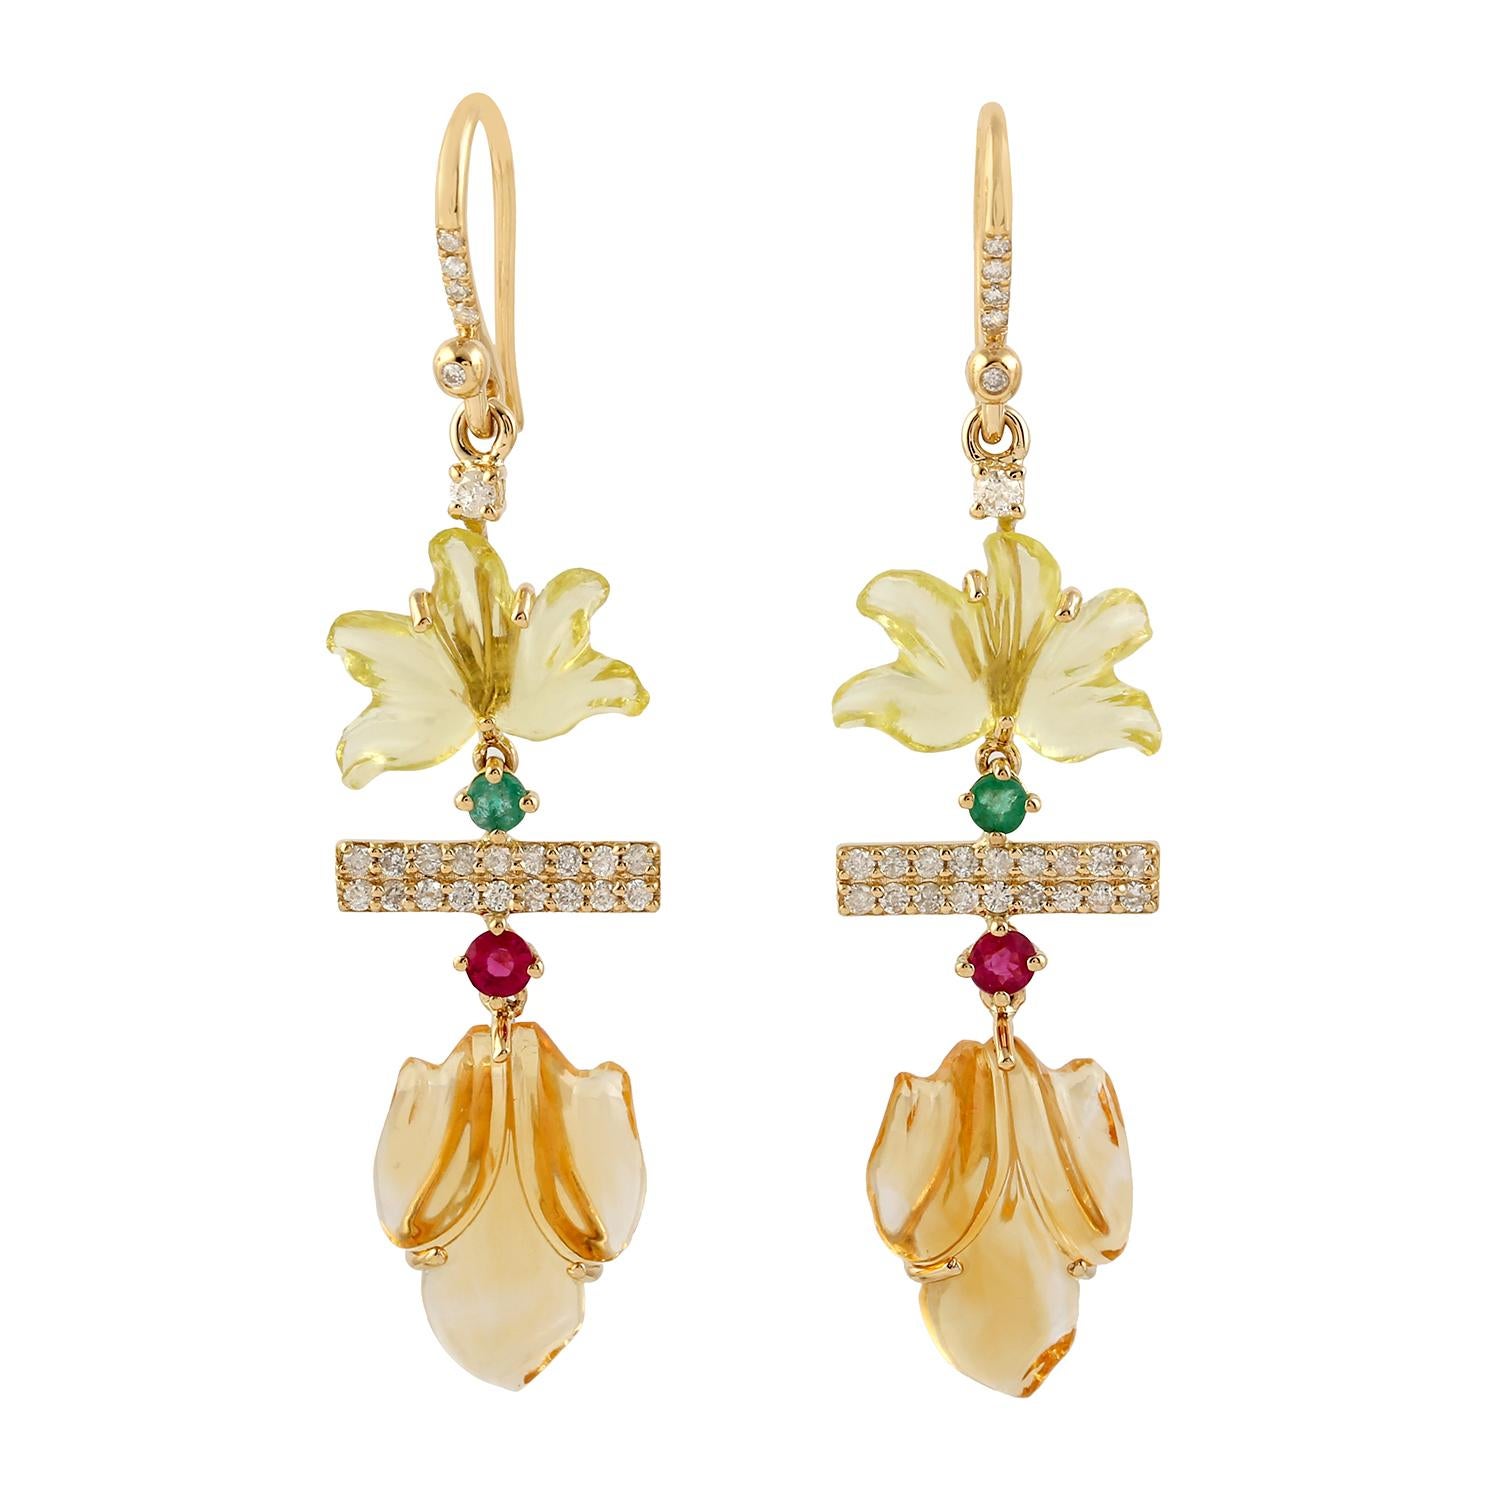 Cast in 18-karat gold. These beautiful earrings are set with 12.2 carats of carved multi gemstone, emerald, citrine, ruby and .41 carats of sparkling diamonds.  See other flower collection matching pieces.

FOLLOW  MEGHNA JEWELS storefront to view